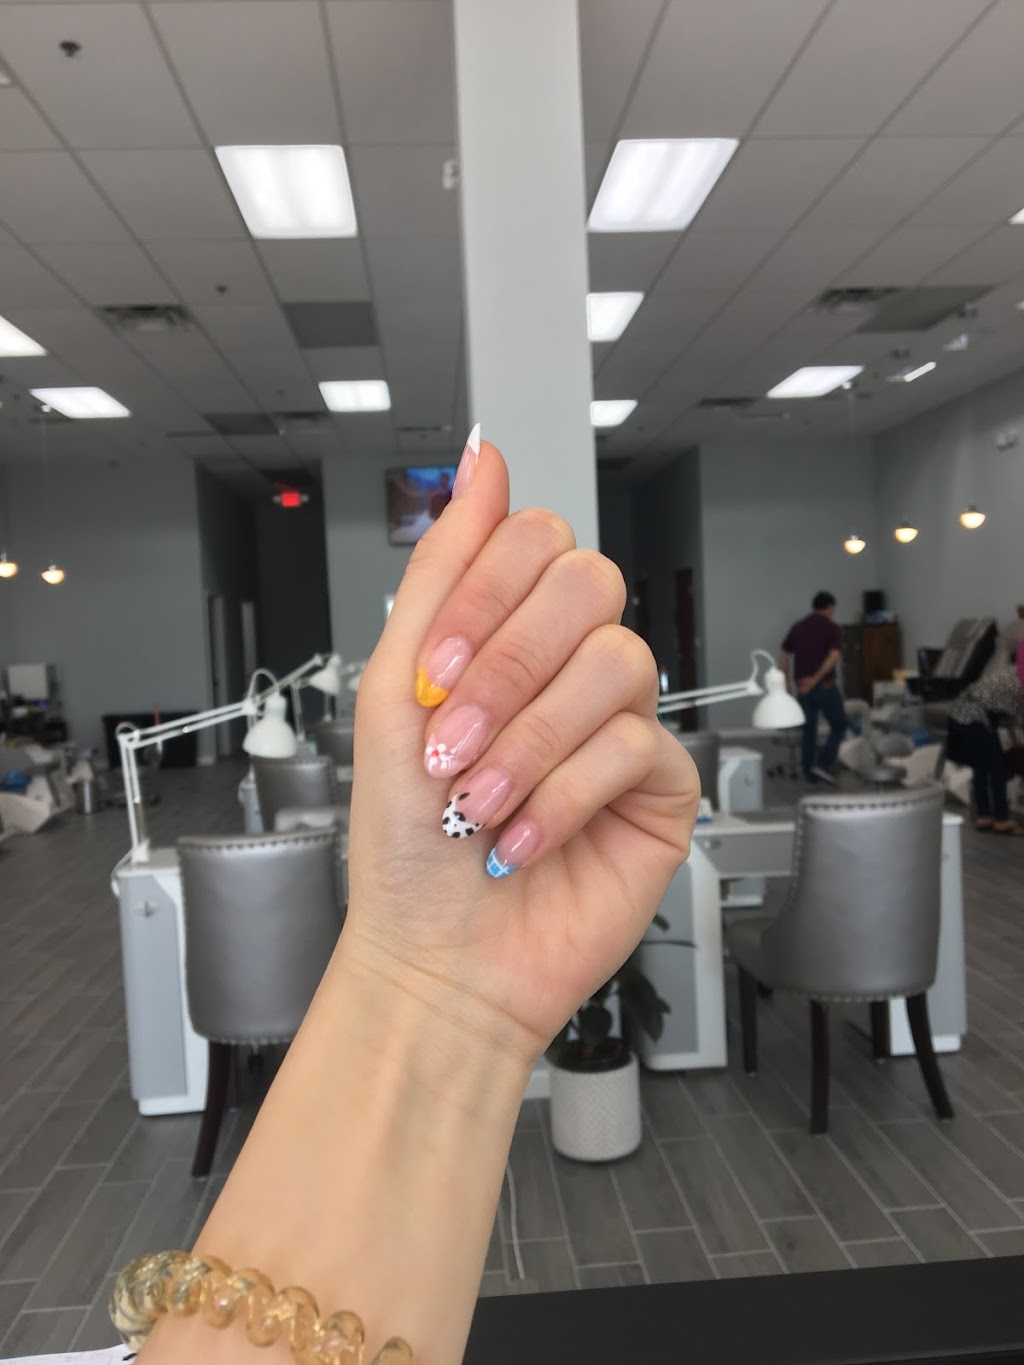 BELLACURE NAILS & SPA | 622 Gravel Pike SPC #113, East Greenville, PA 18041, USA | Phone: (267) 313-4225